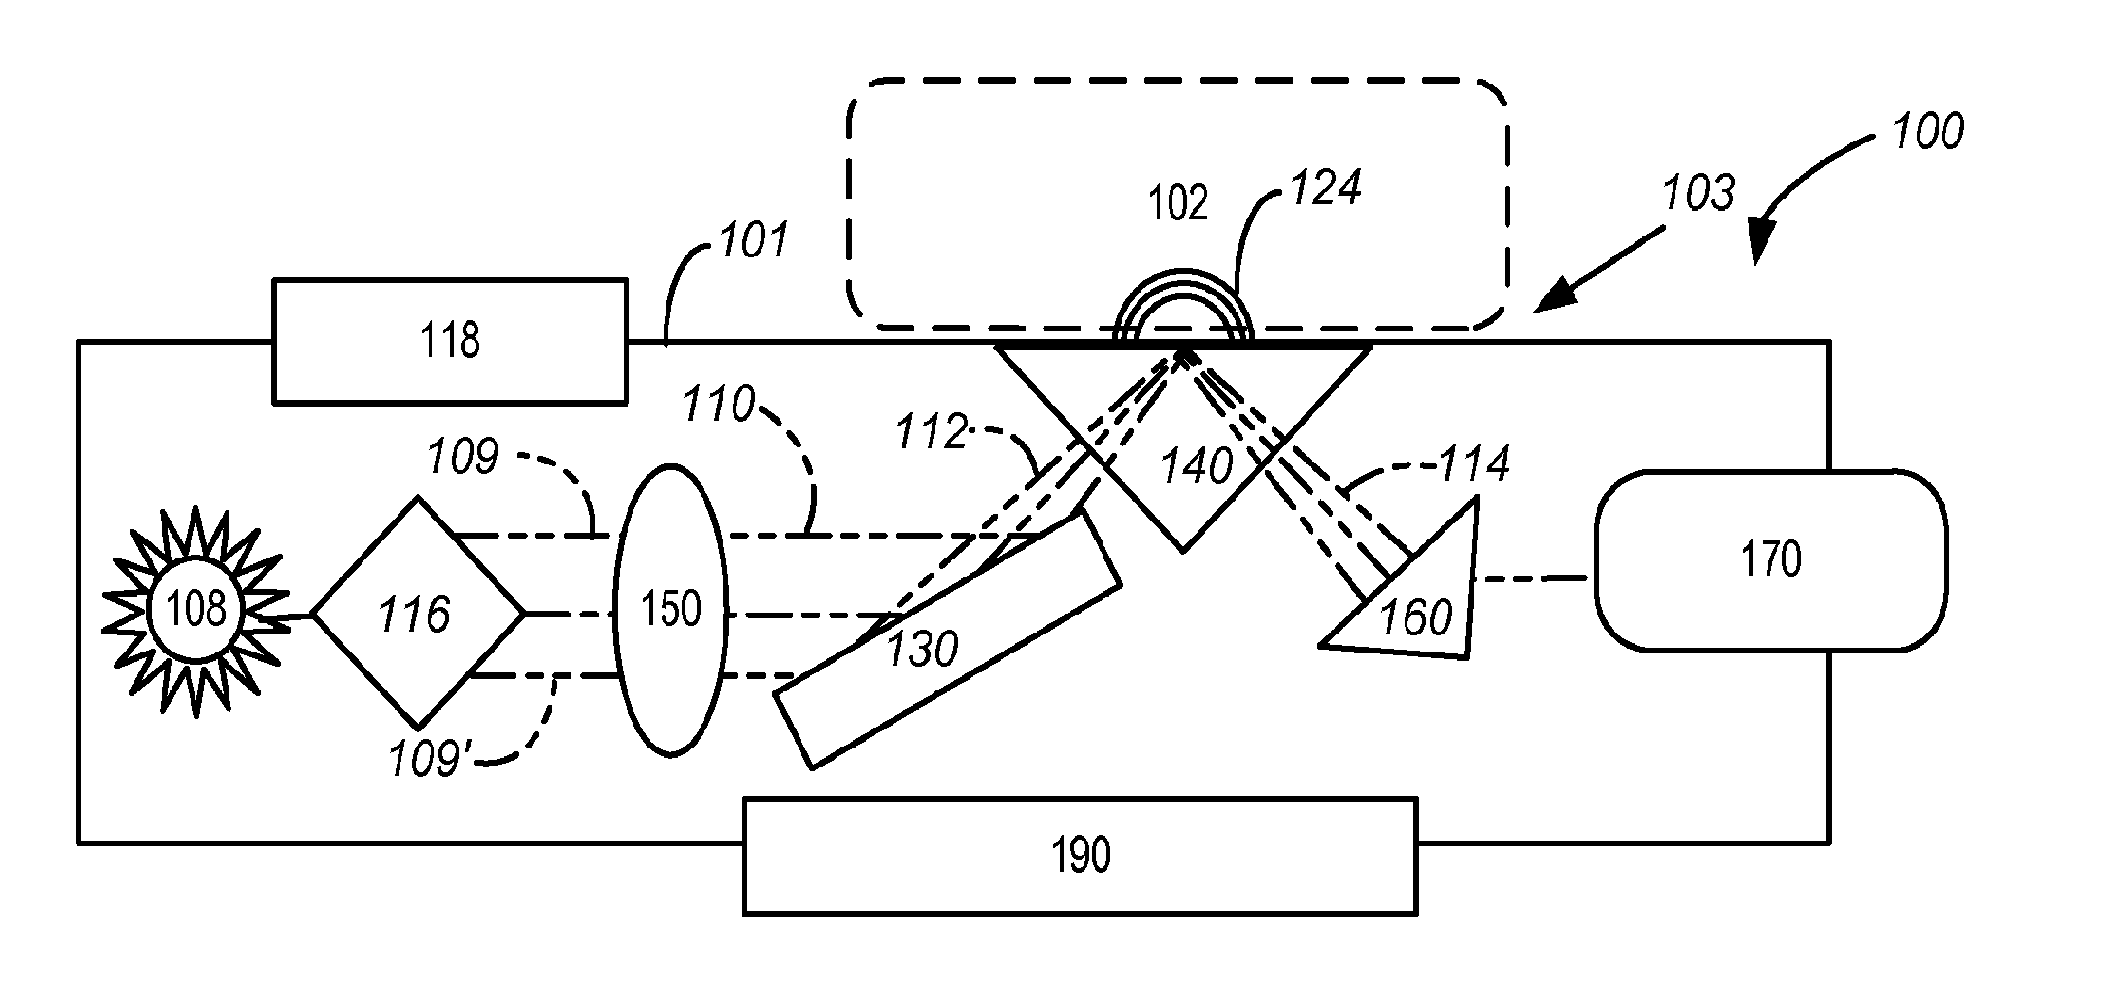 Peri-critical reflection spectroscopy devices, systems, and methods